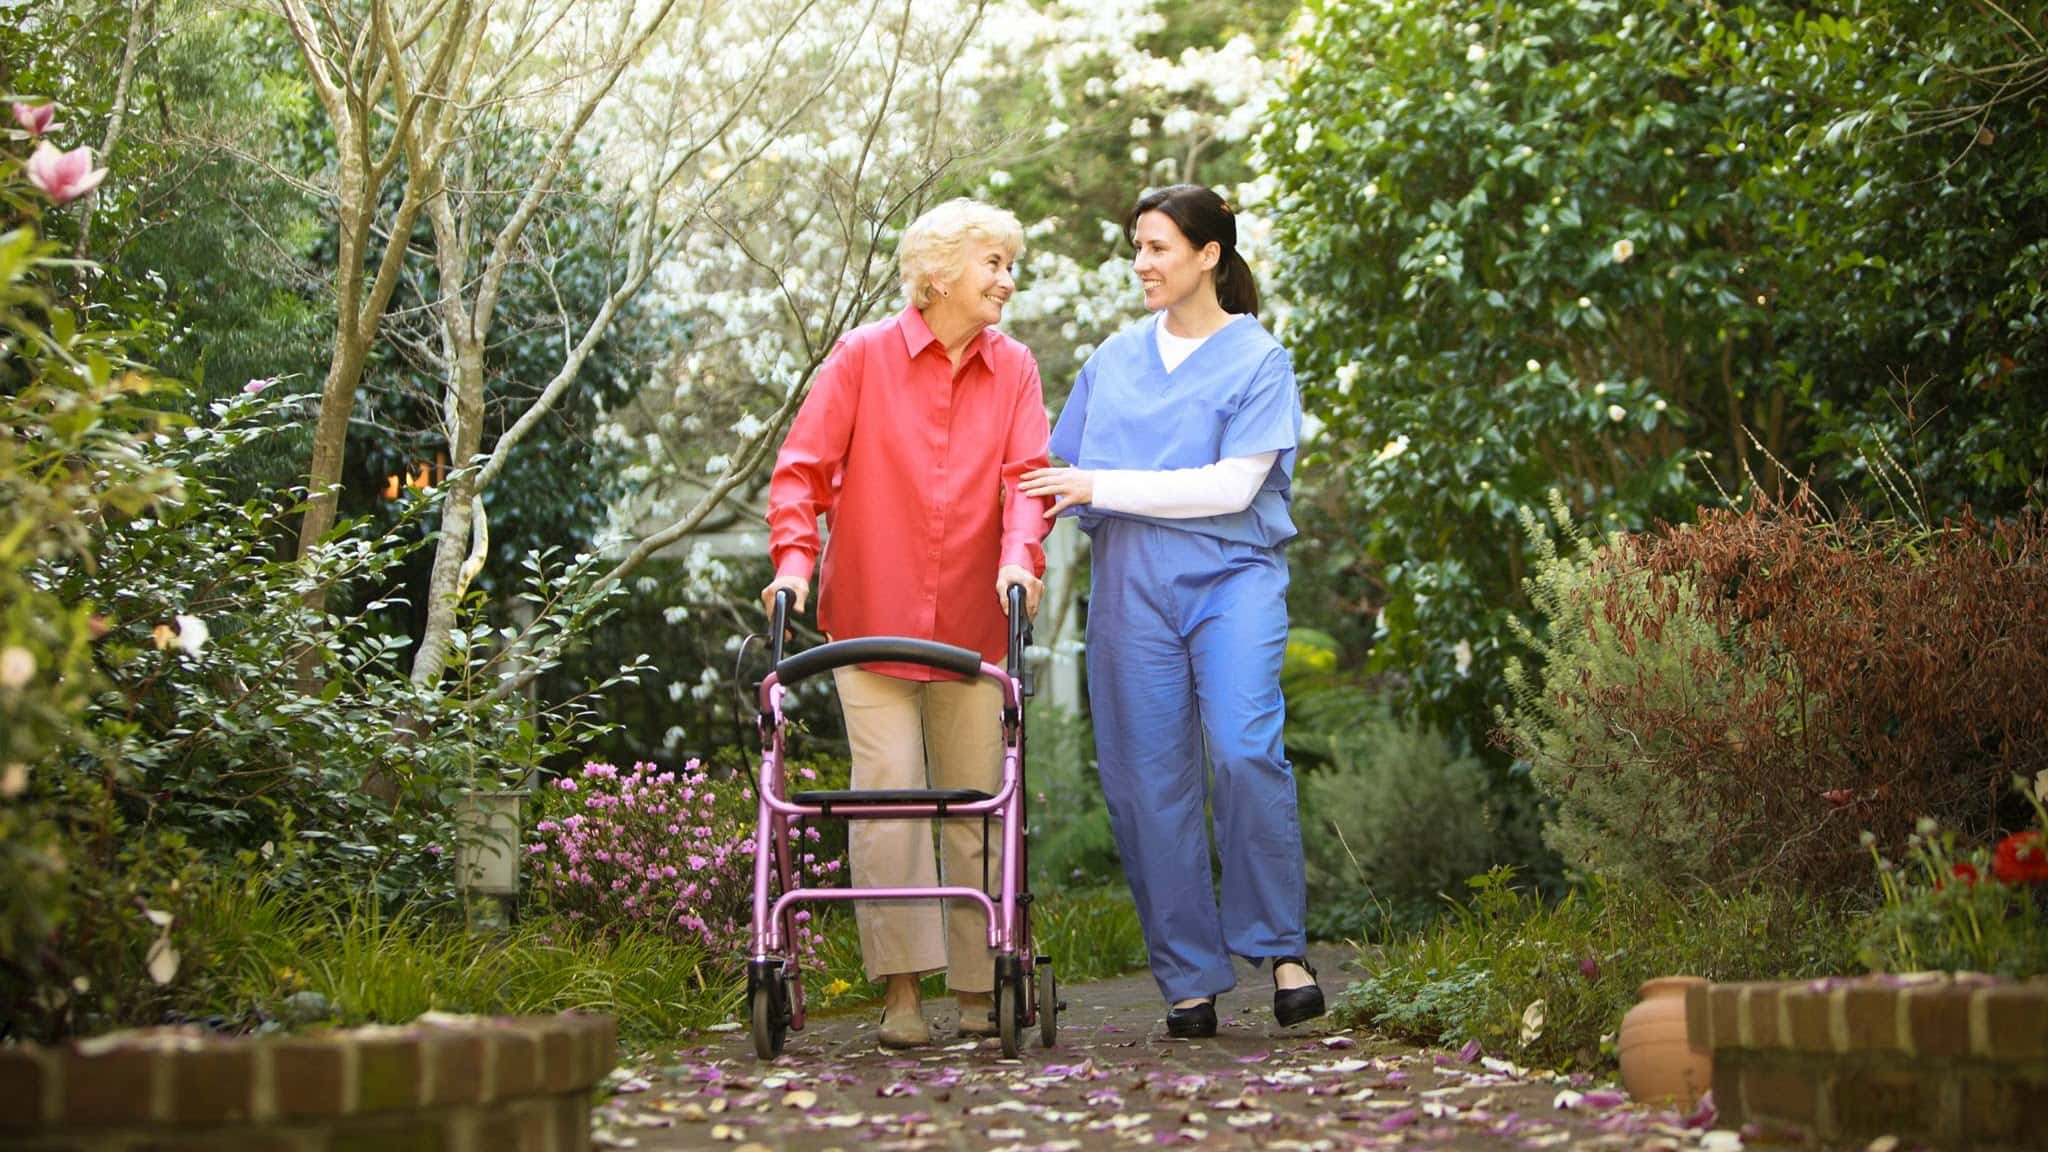 Home Care Assistance Philadelphia - Chalfont, PA, US, your home care